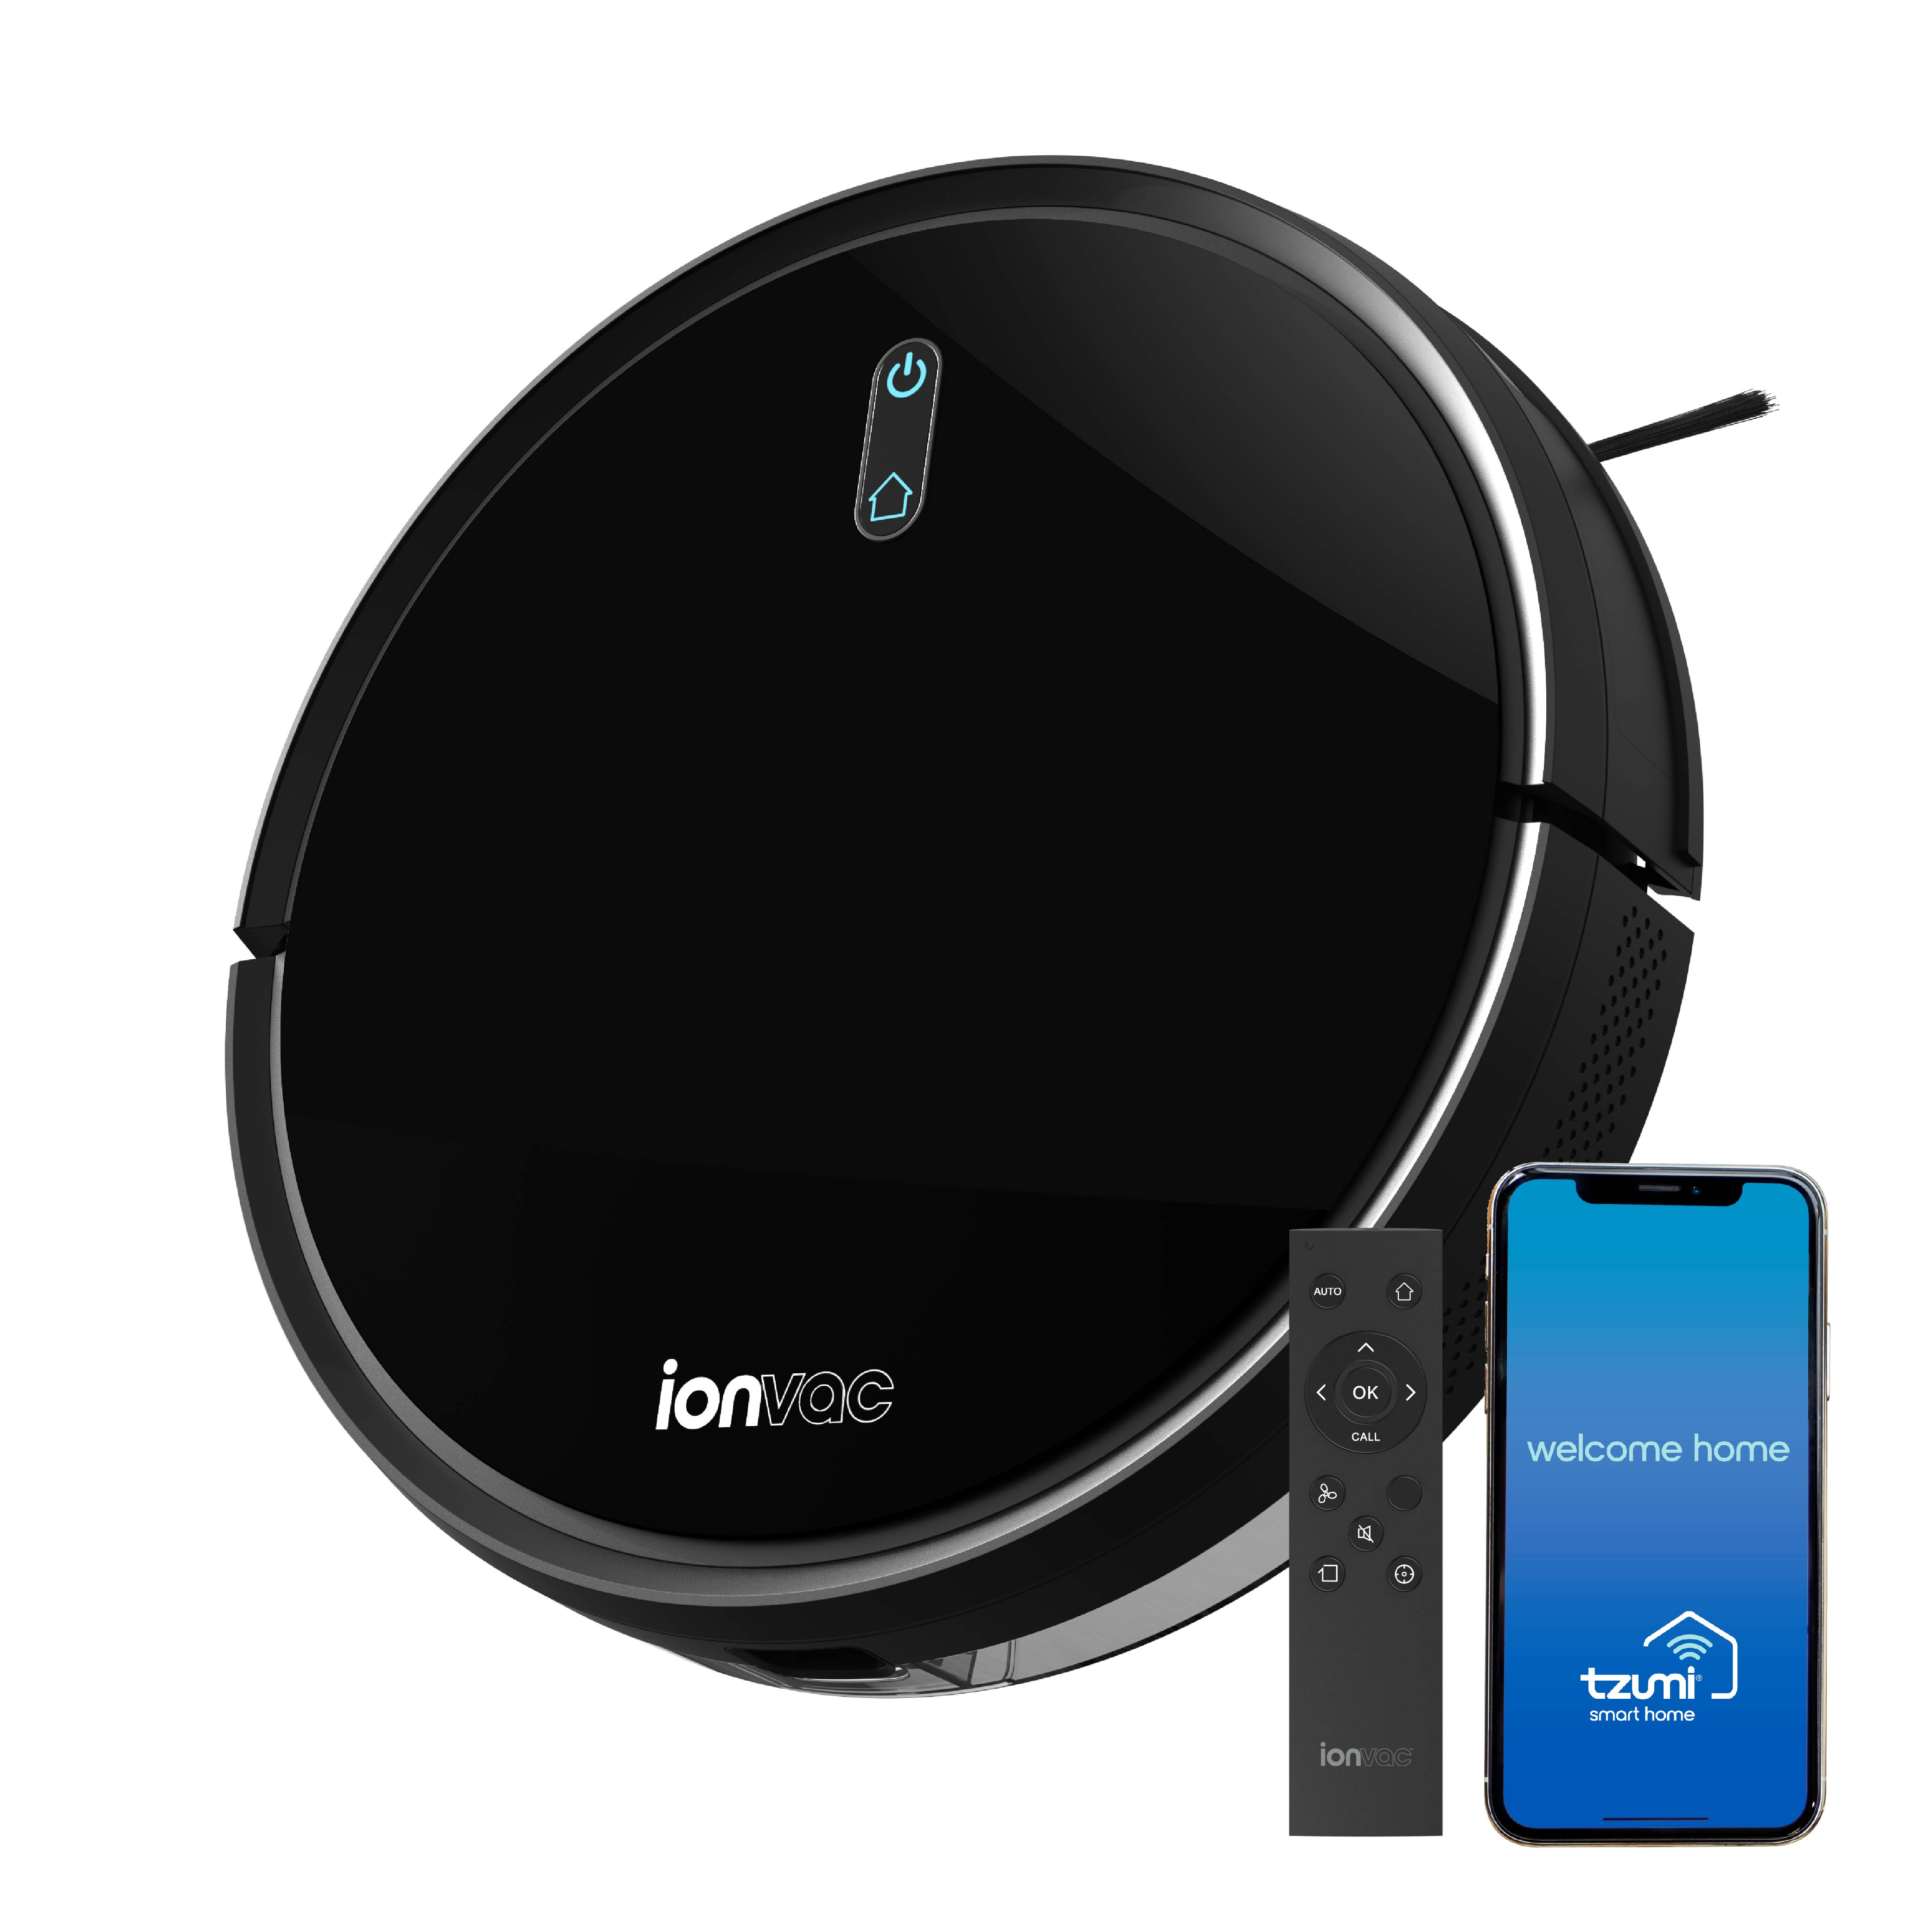 IonVac UltraClean Robovac with Smart Mapping, Wi-Fi Robot Vacuum Cleaner with App/Remote Control - image 1 of 10